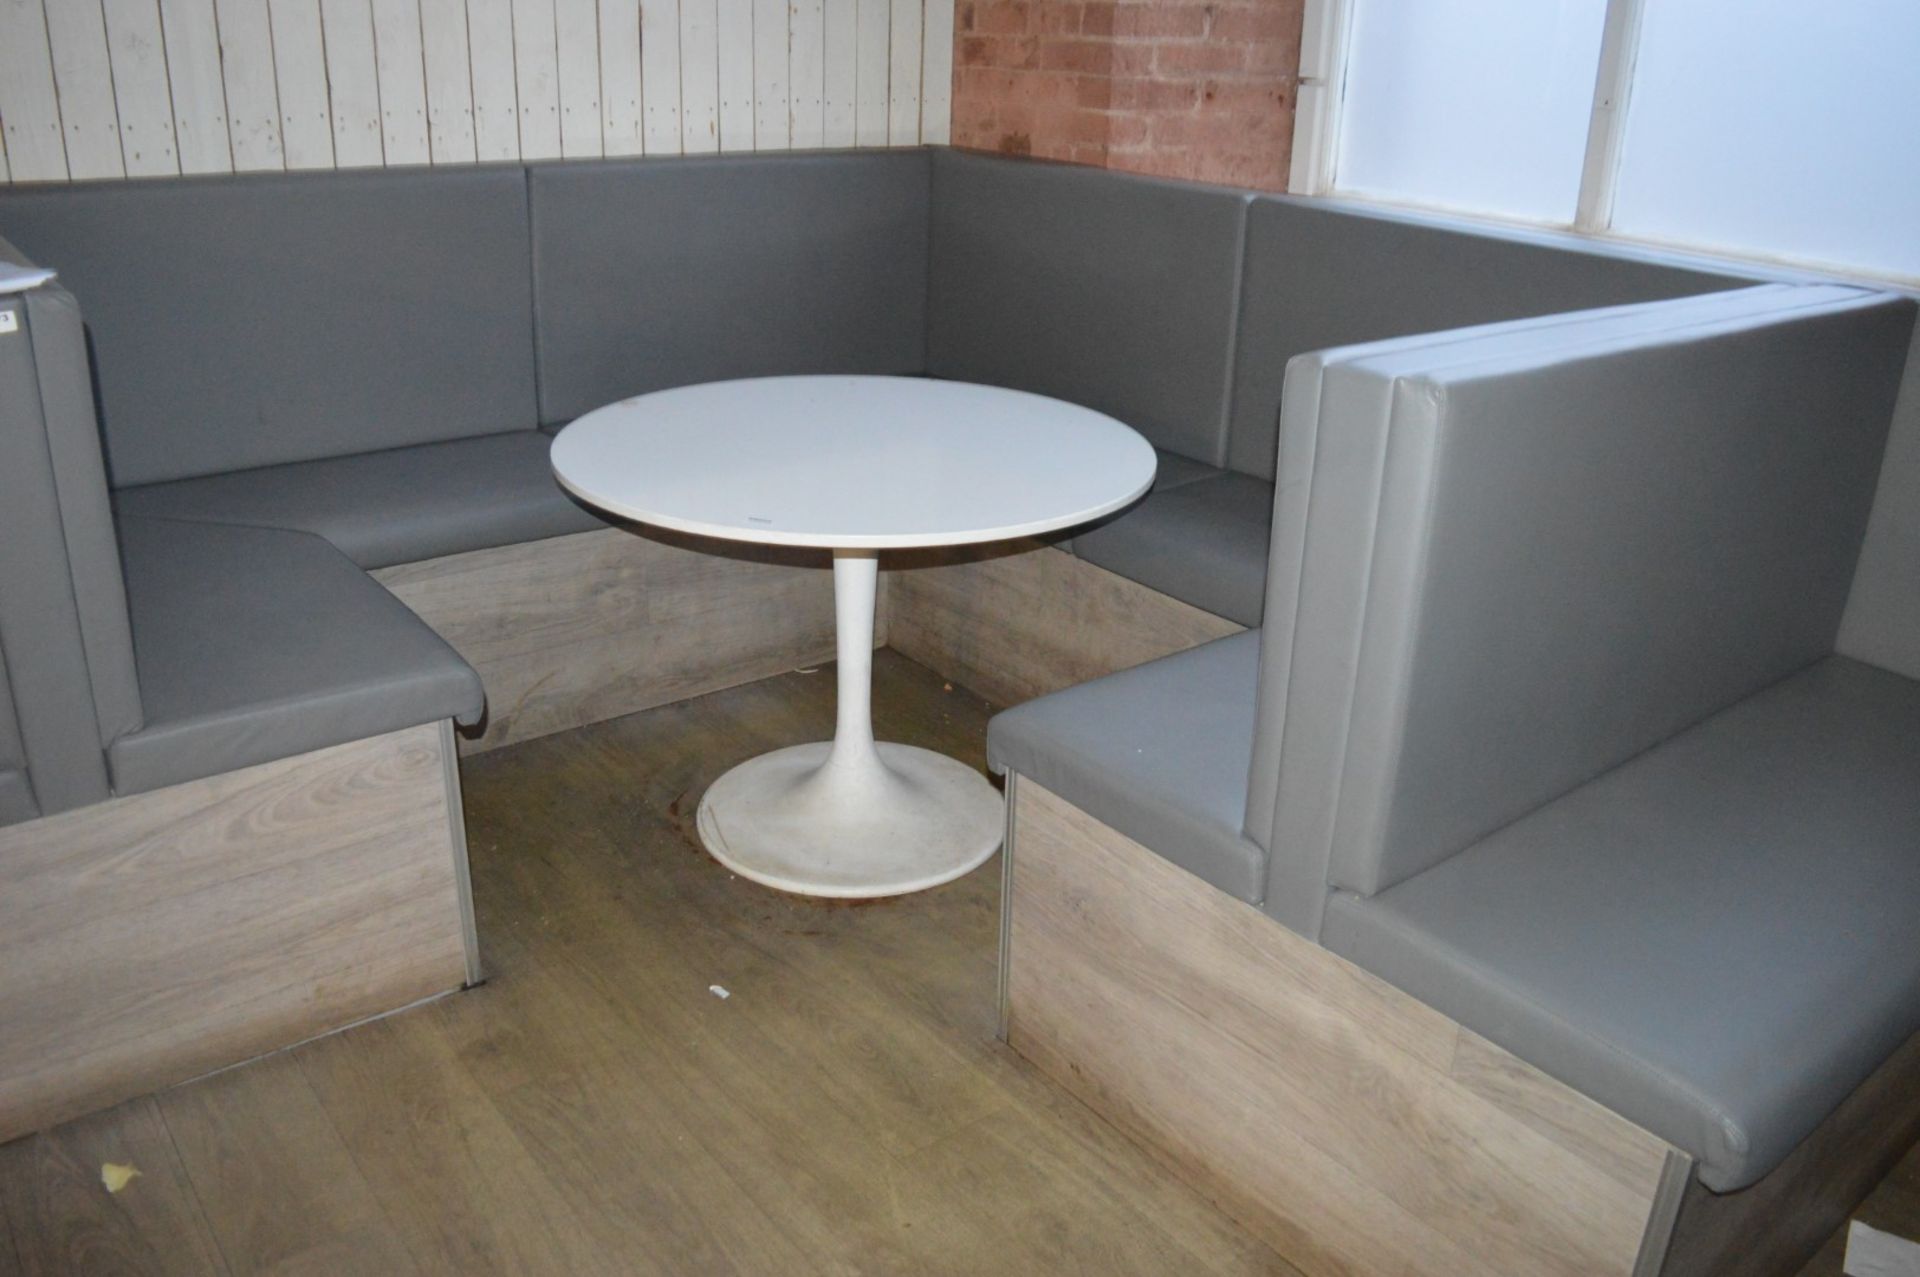 1 x Large Collection of Contemporary Restaurant Seating With Driftwood Finish and Grey Faux - Image 12 of 30